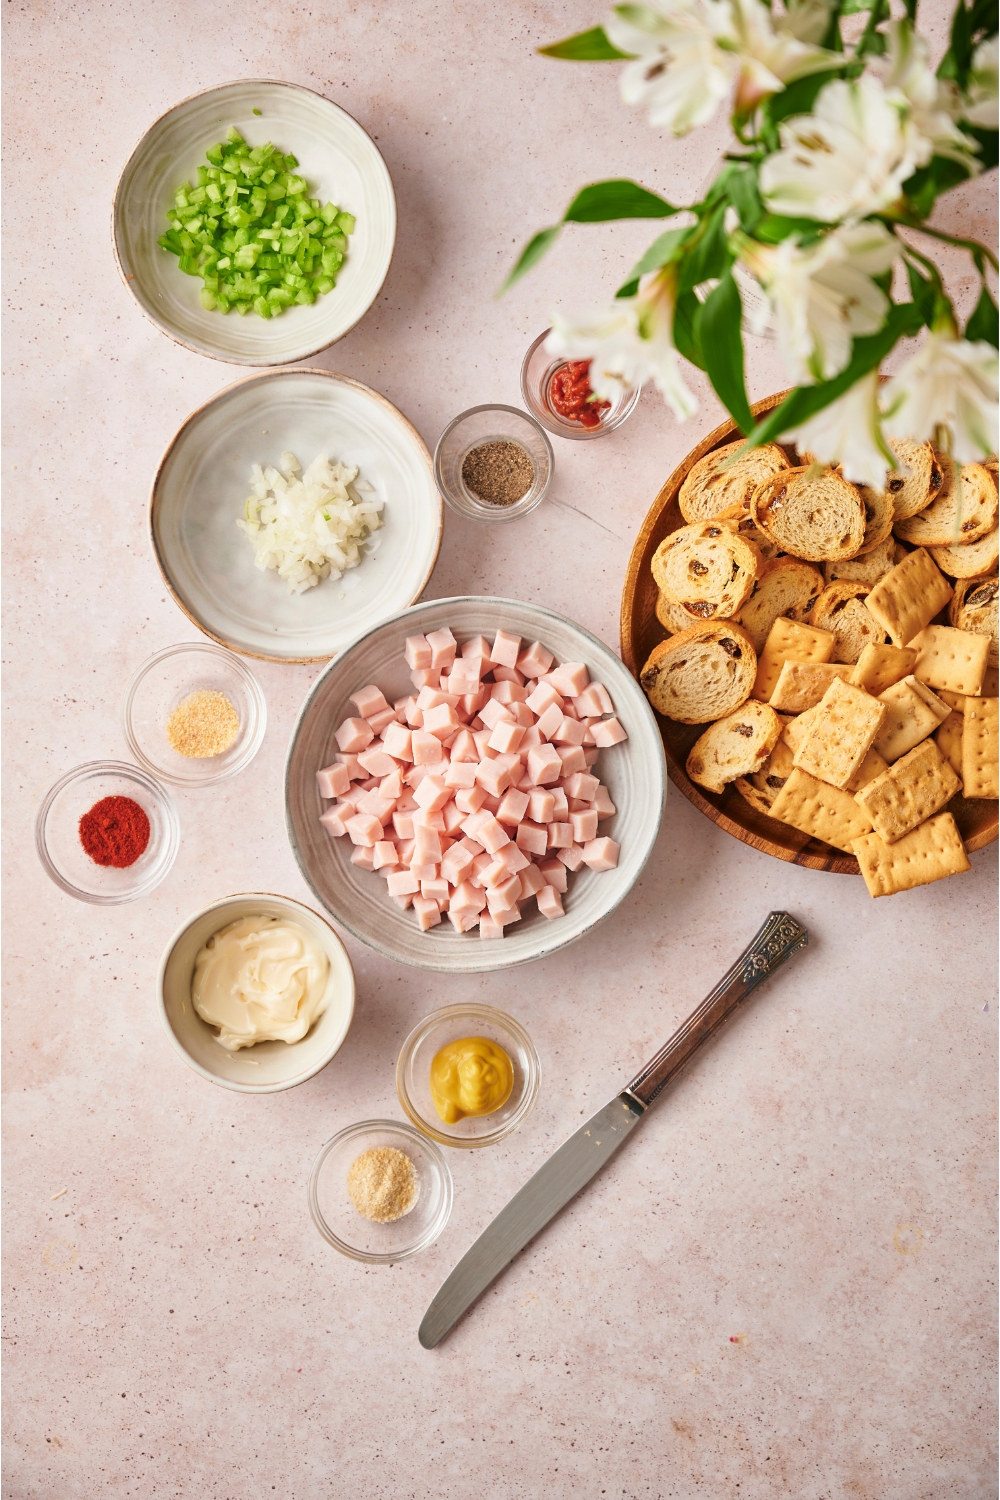 An assortment of ingredients including bowls of cubed ham, mayonnaise, diced celery, diced onion, mustard, spices, and a plate of crackers and bread.